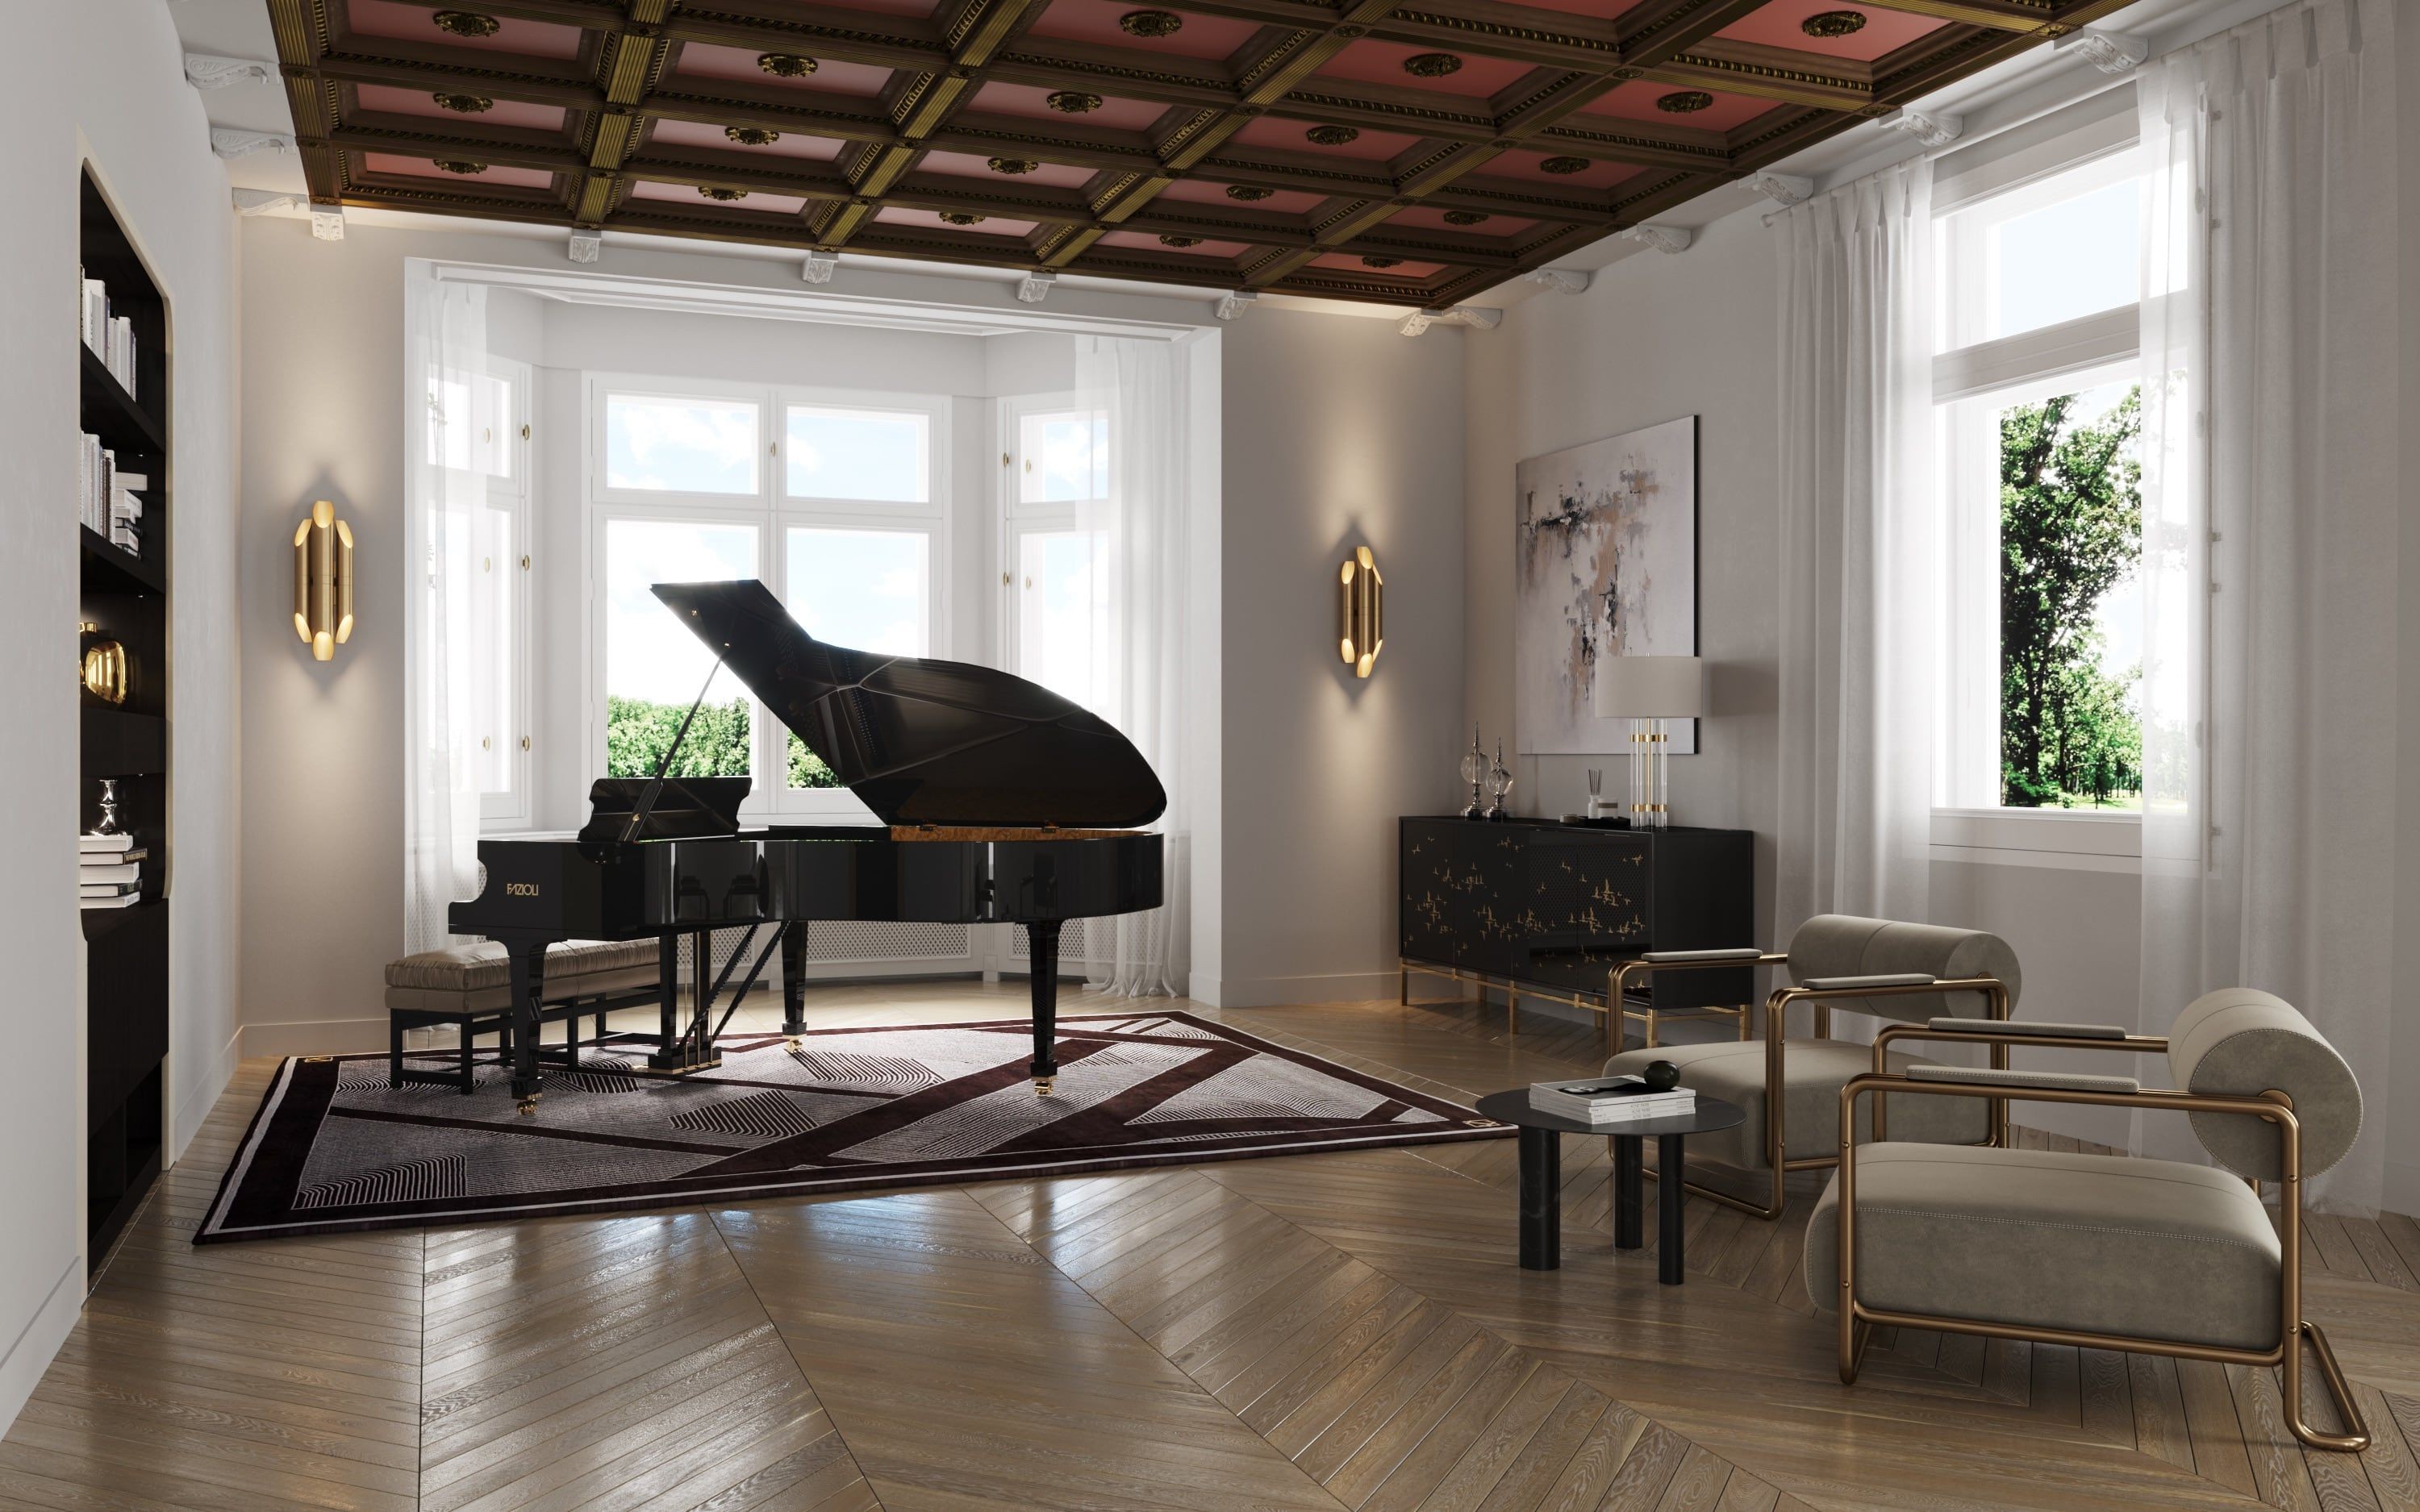 3D Interior Visualization of leisure space in renovated old built villa in Berlin Wannsee, Germany